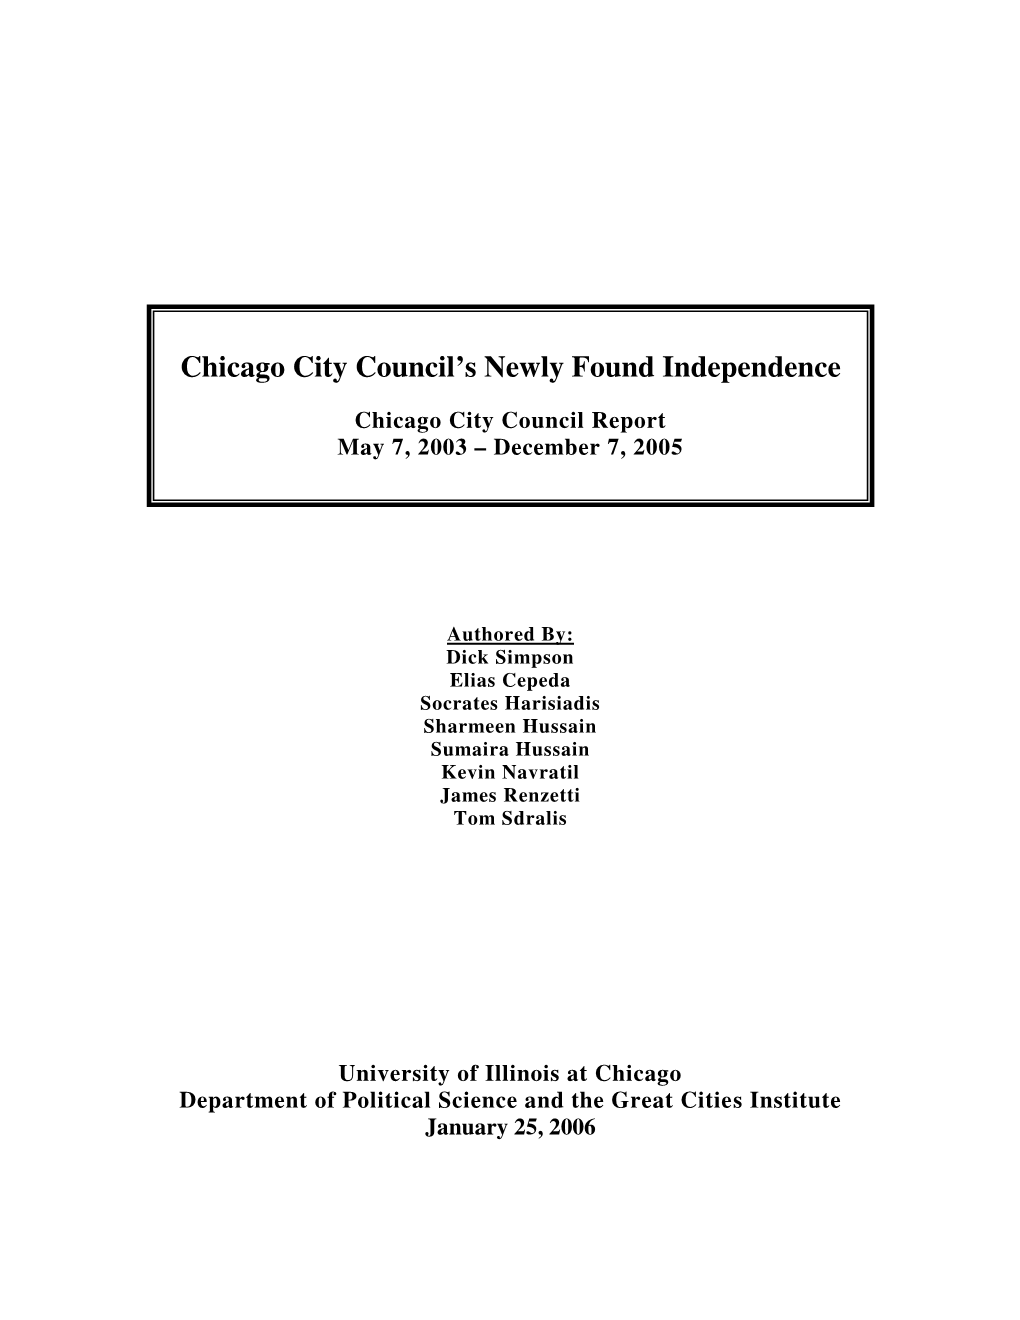 Chicago City Council Report May 7, 2003 – December 7, 2005